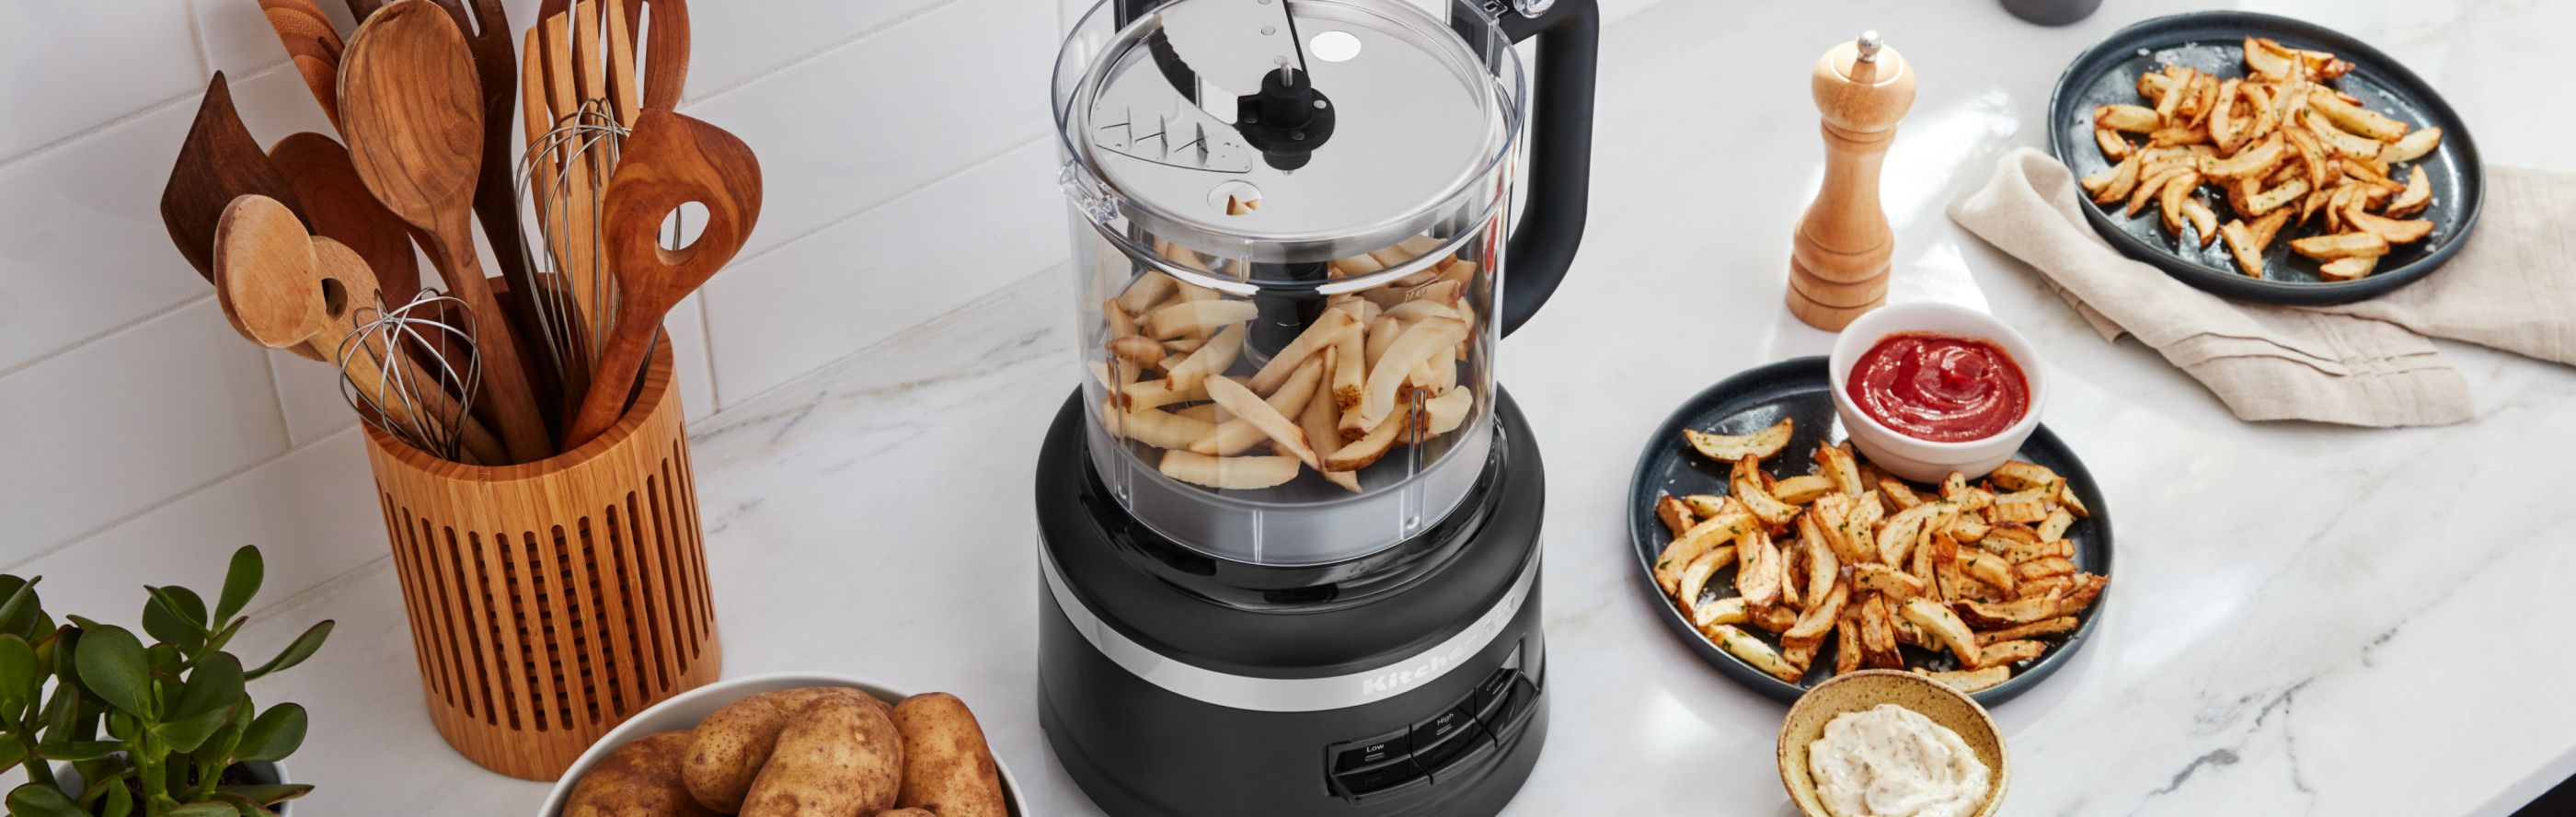 KitchenAid® food processor on a modern kitchen counter next to plates of french fries